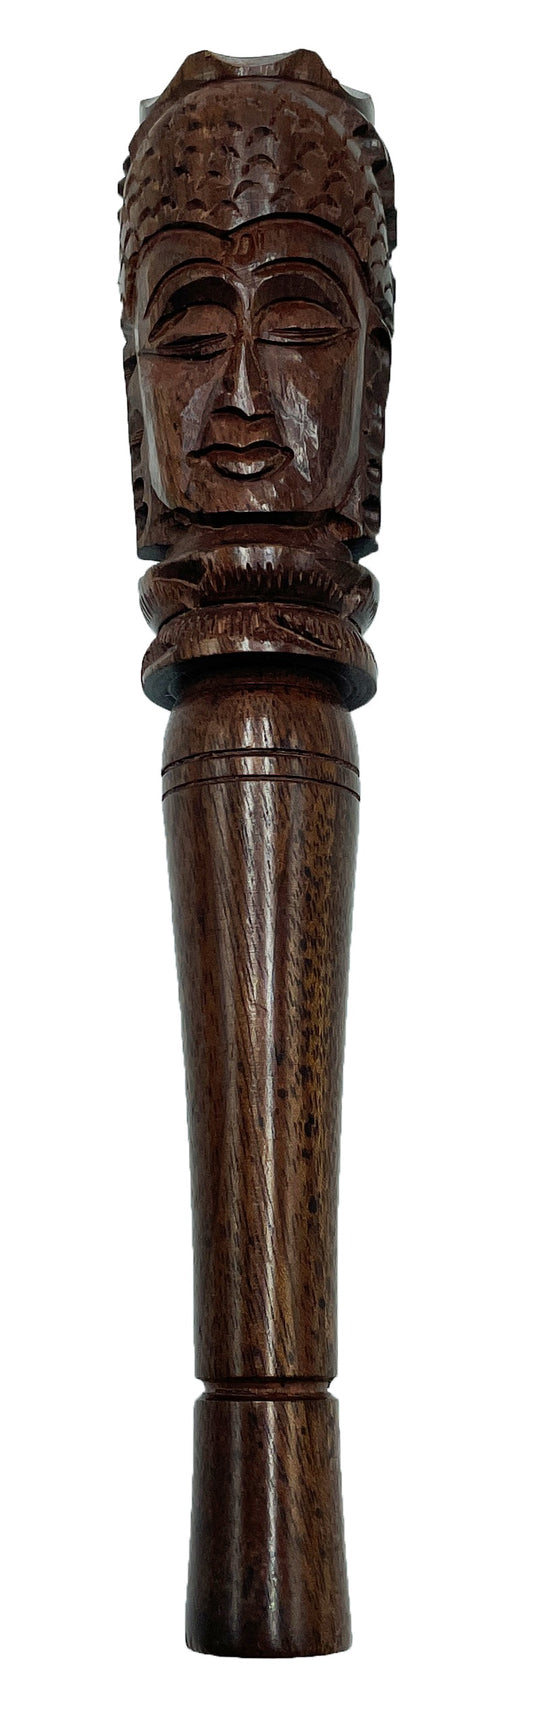 6 Wood Chillum with Shiva Carving